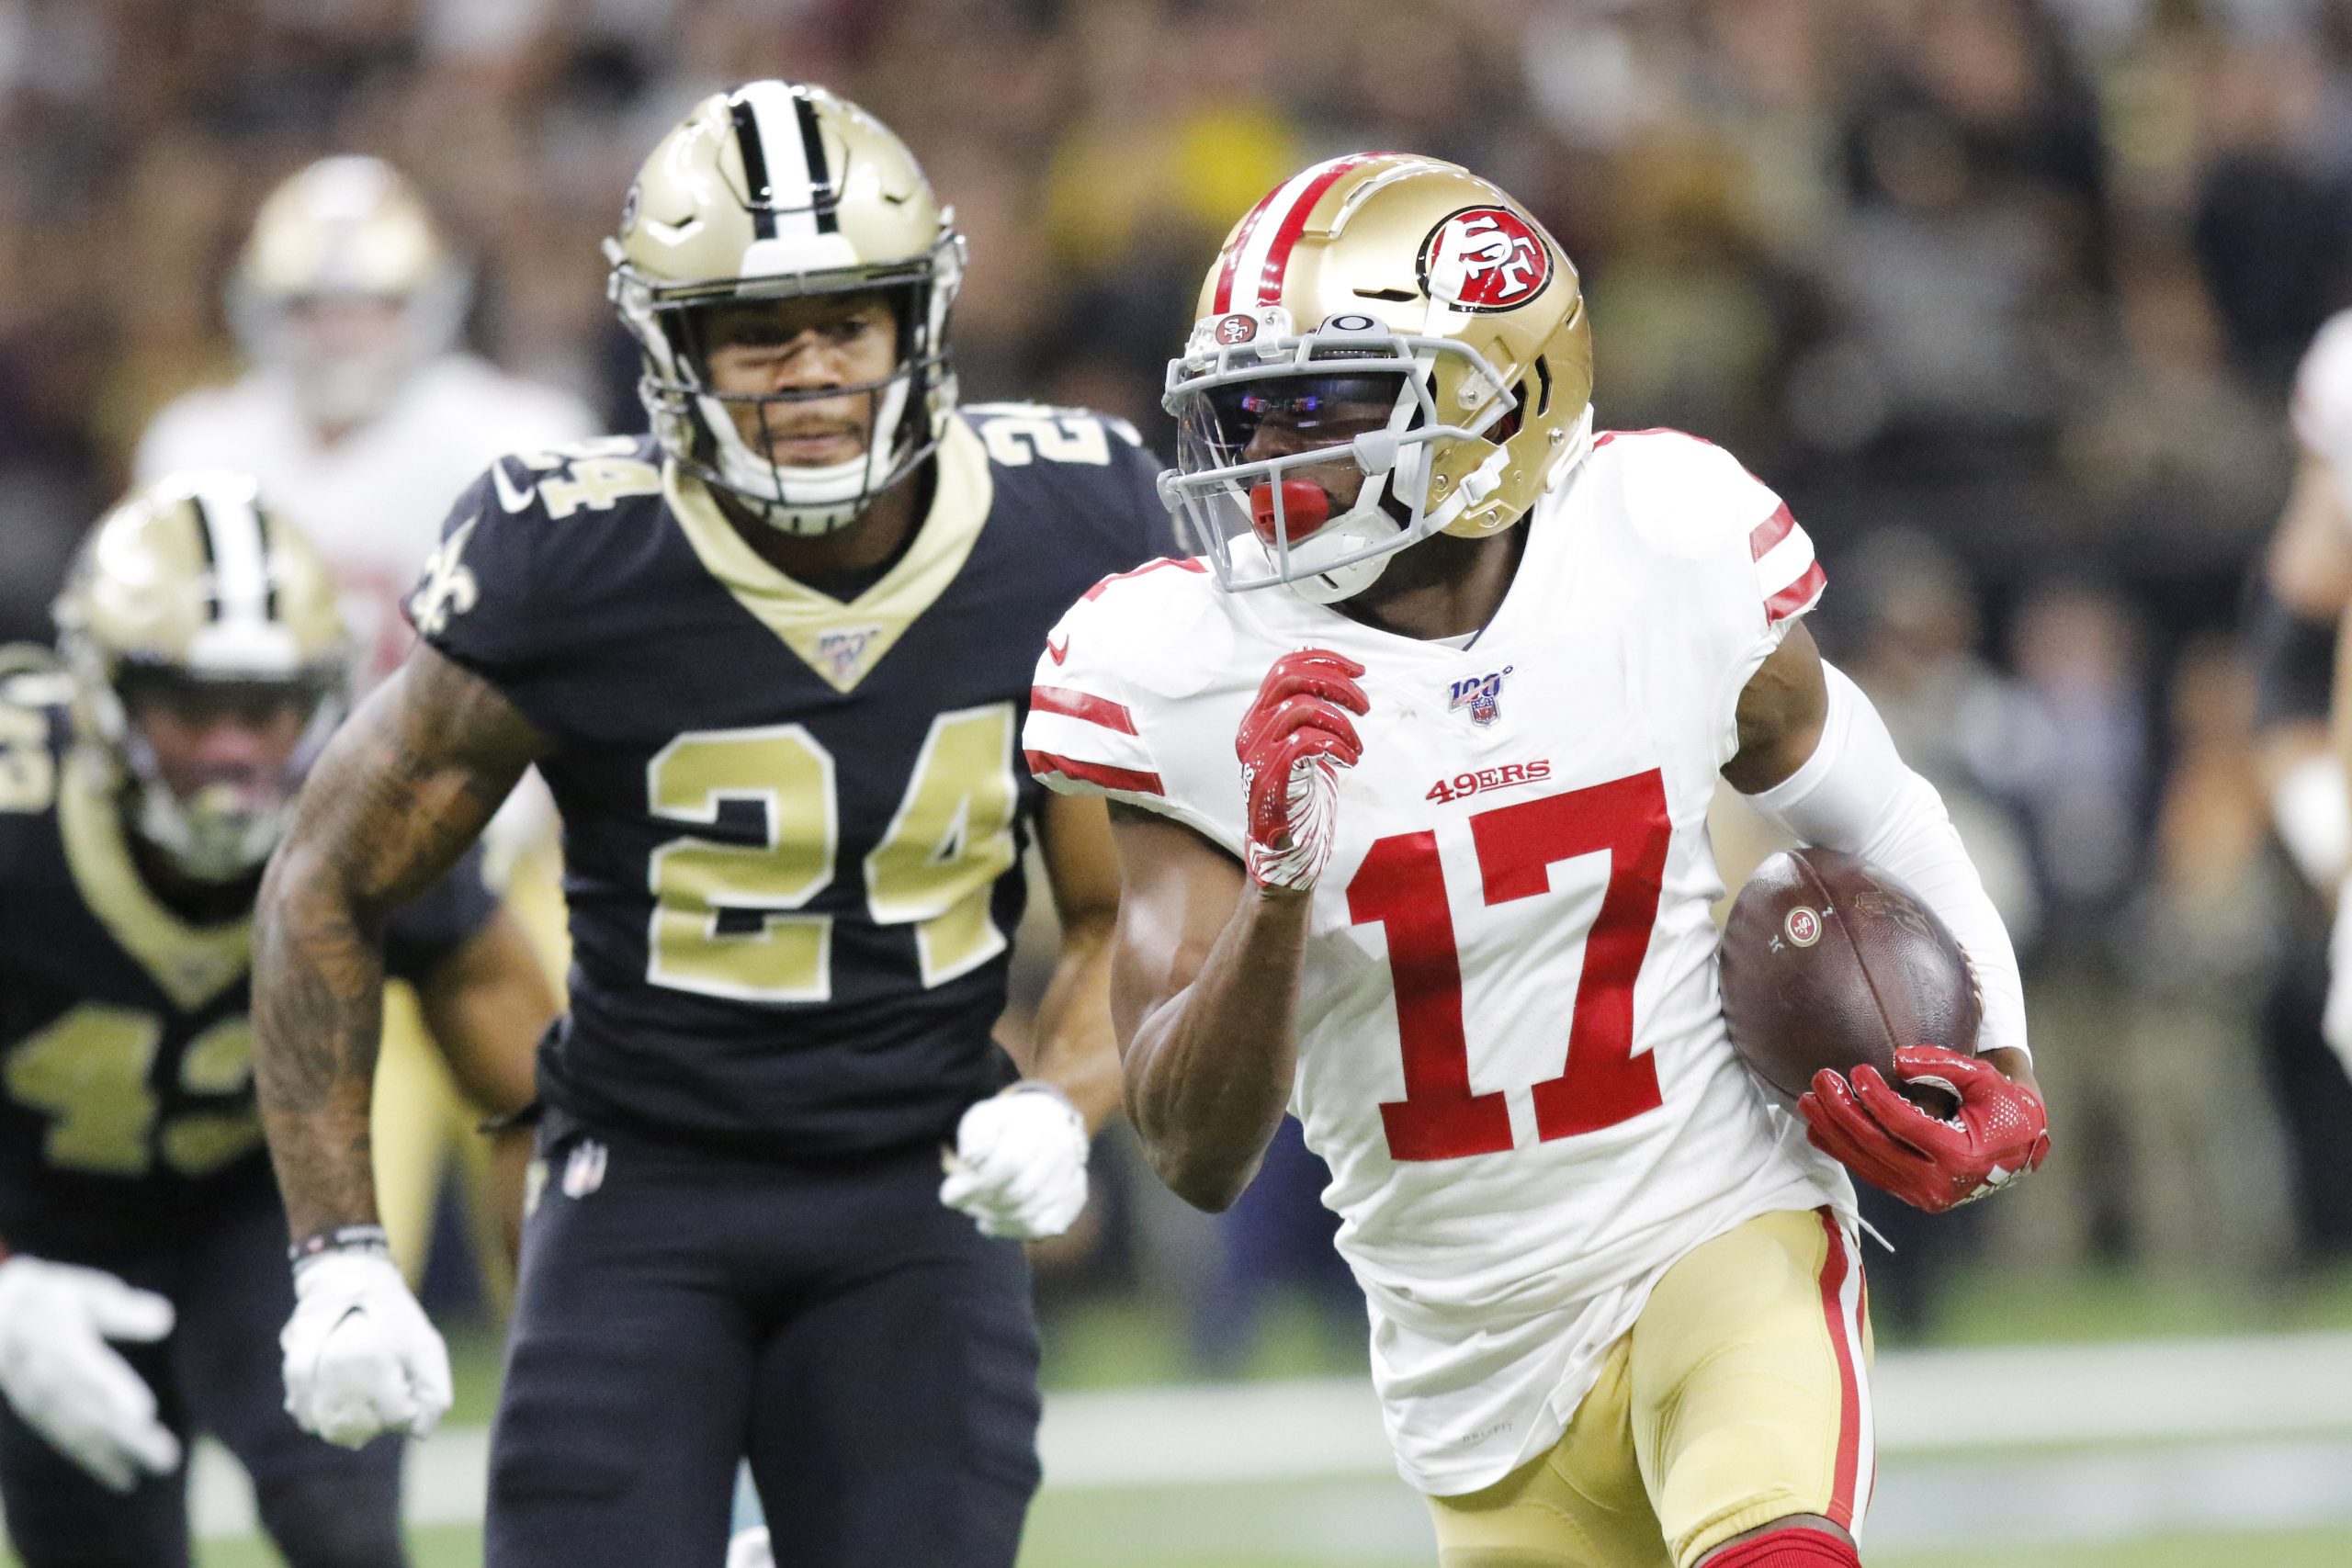 December 8, 2019, New Orleans, LOUISIANA, U.S: (left to right) New Orleans Saints strong safety Vonn Bell chases after S